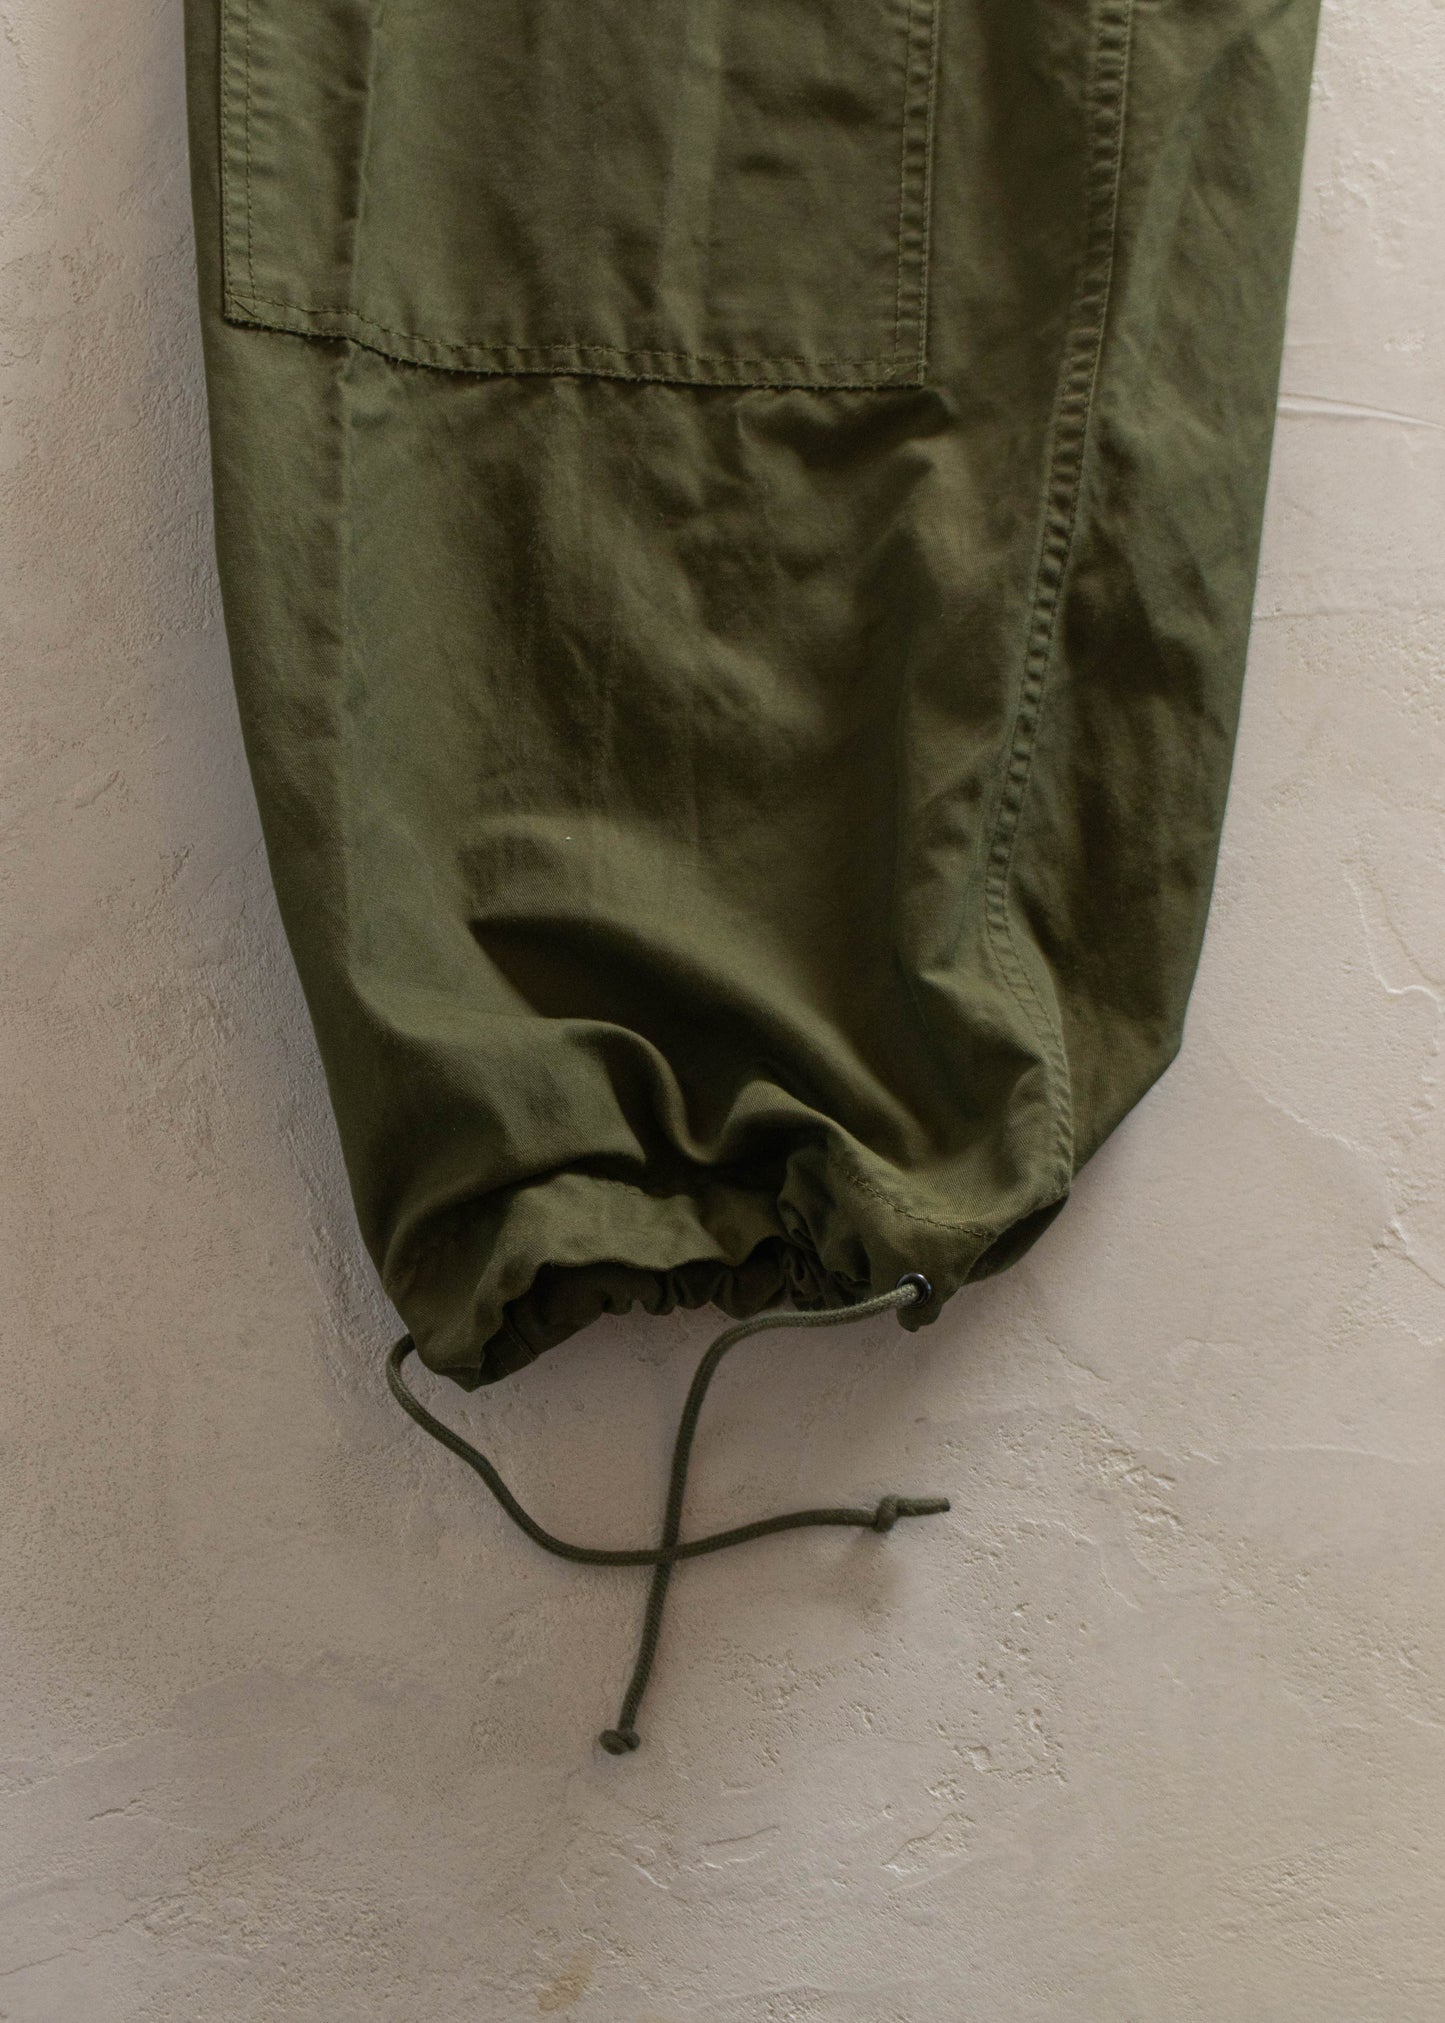 1990s Military Wind Cargo Pants Size M/L